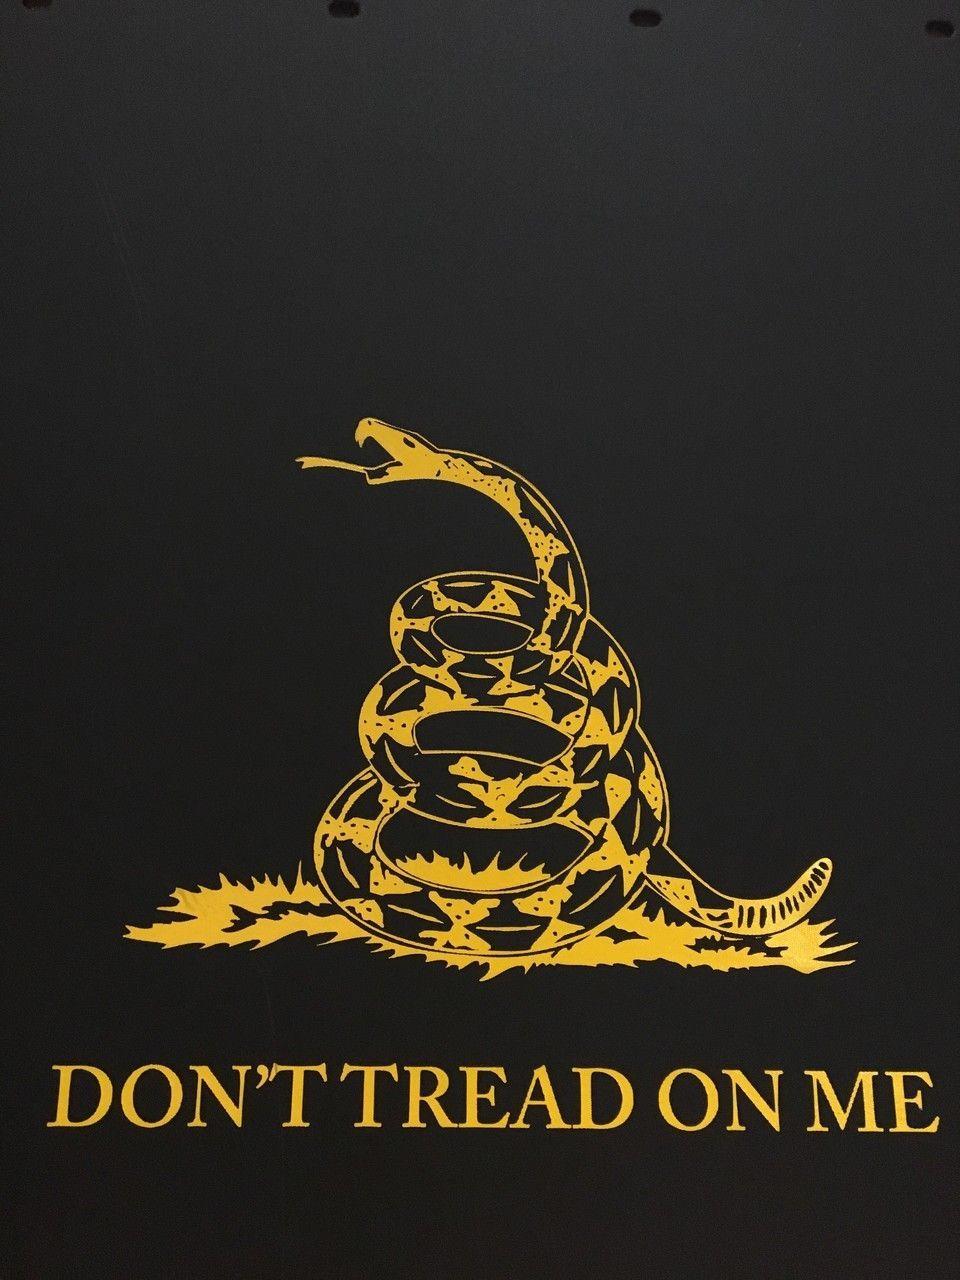 311 Dont Tread On Me Images Stock Photos  Vectors  Shutterstock